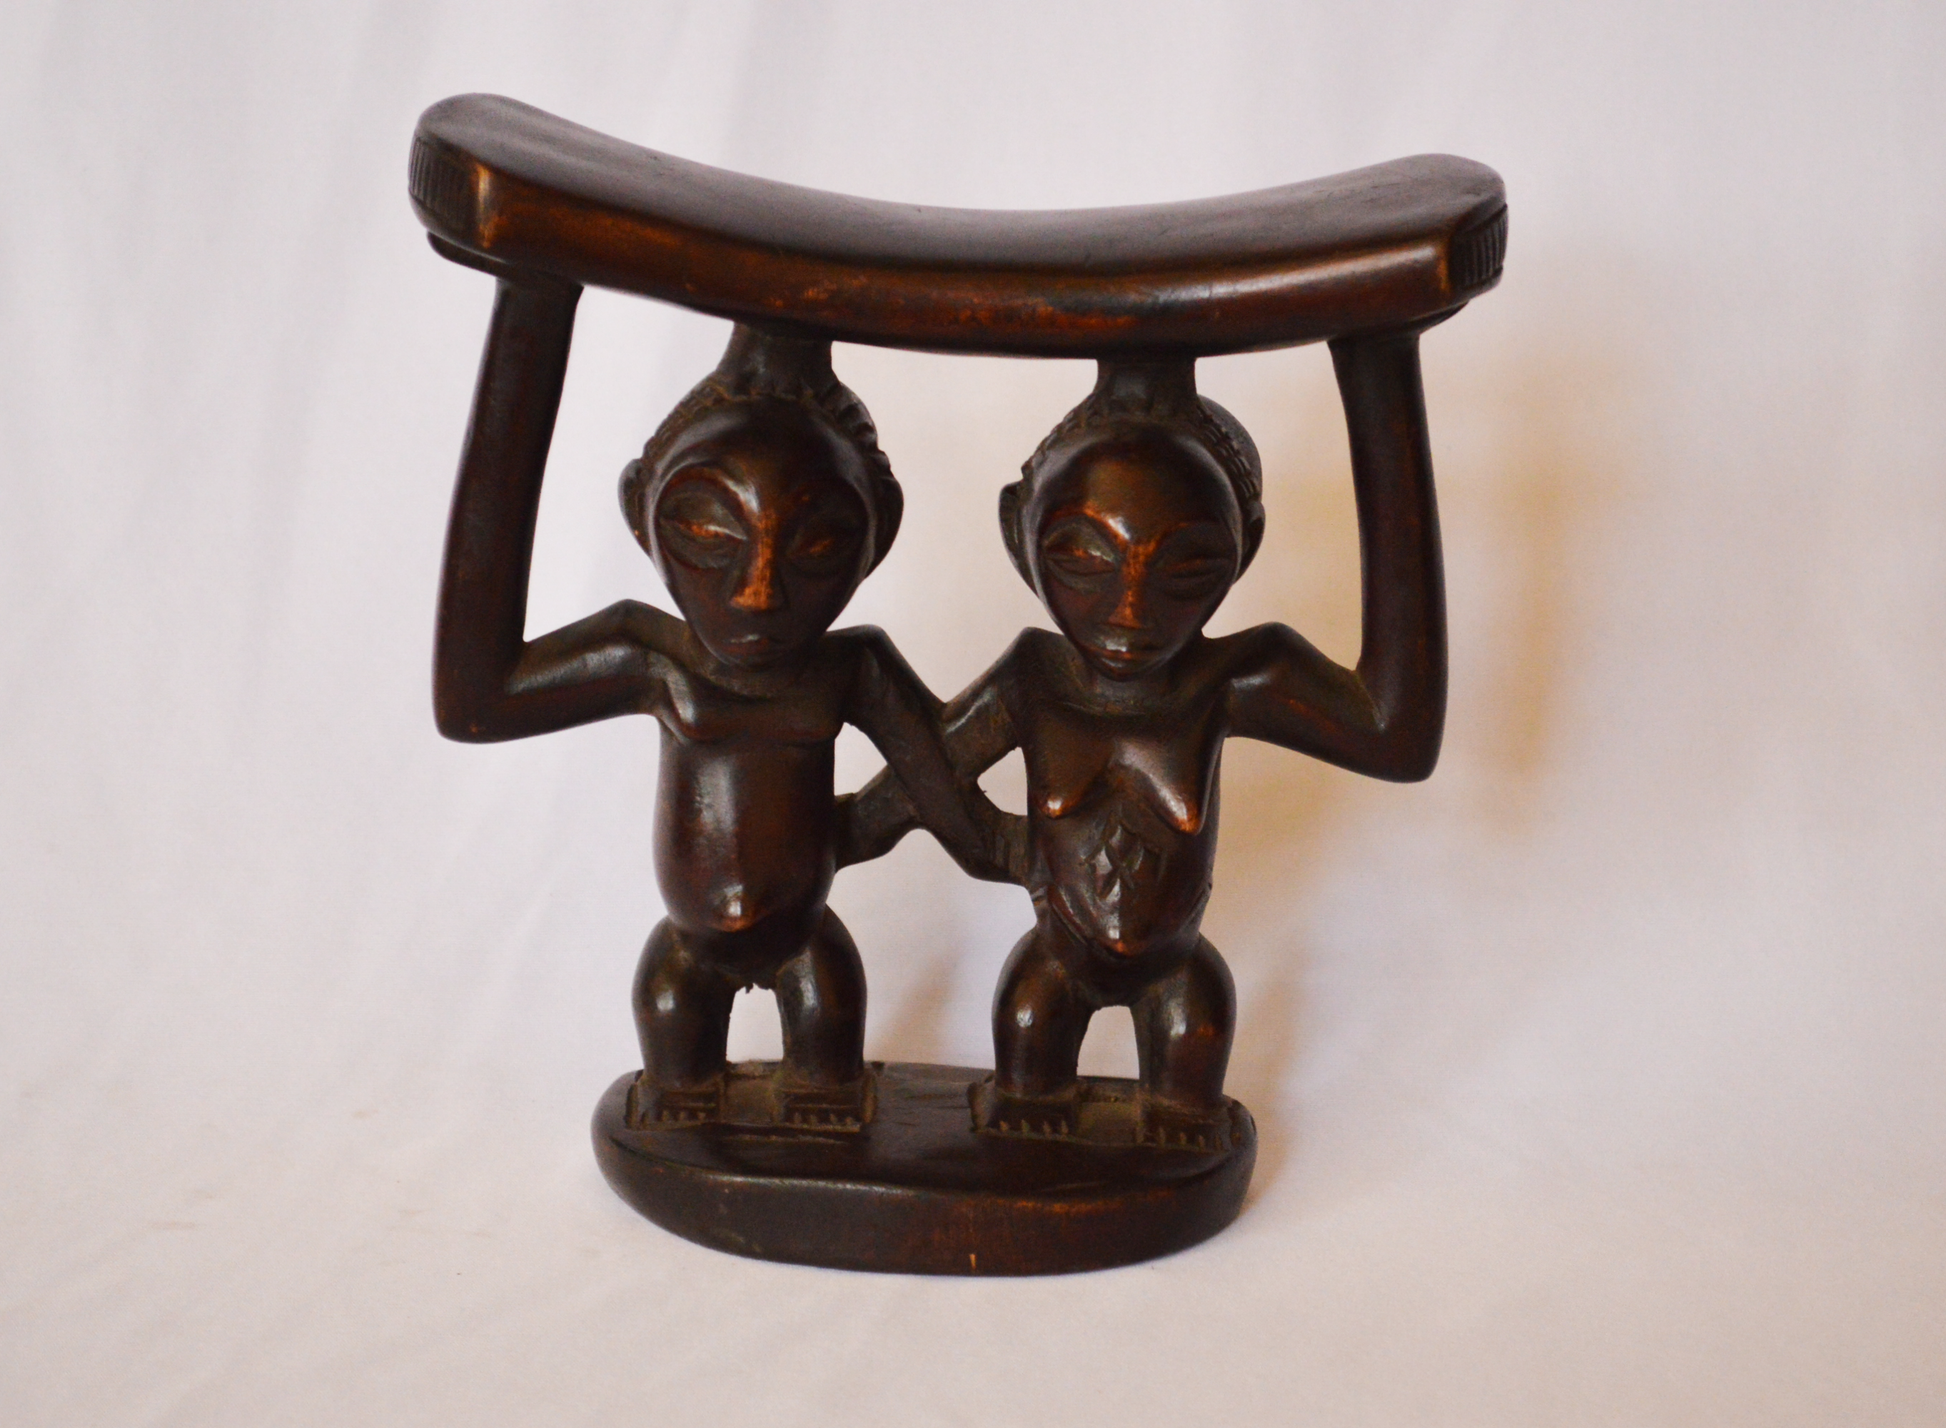 Luba Headrest - Authentic African handicrafts | Clothing, bags, painting, toys & more - CULTURE HUB by Muthoni Unchained